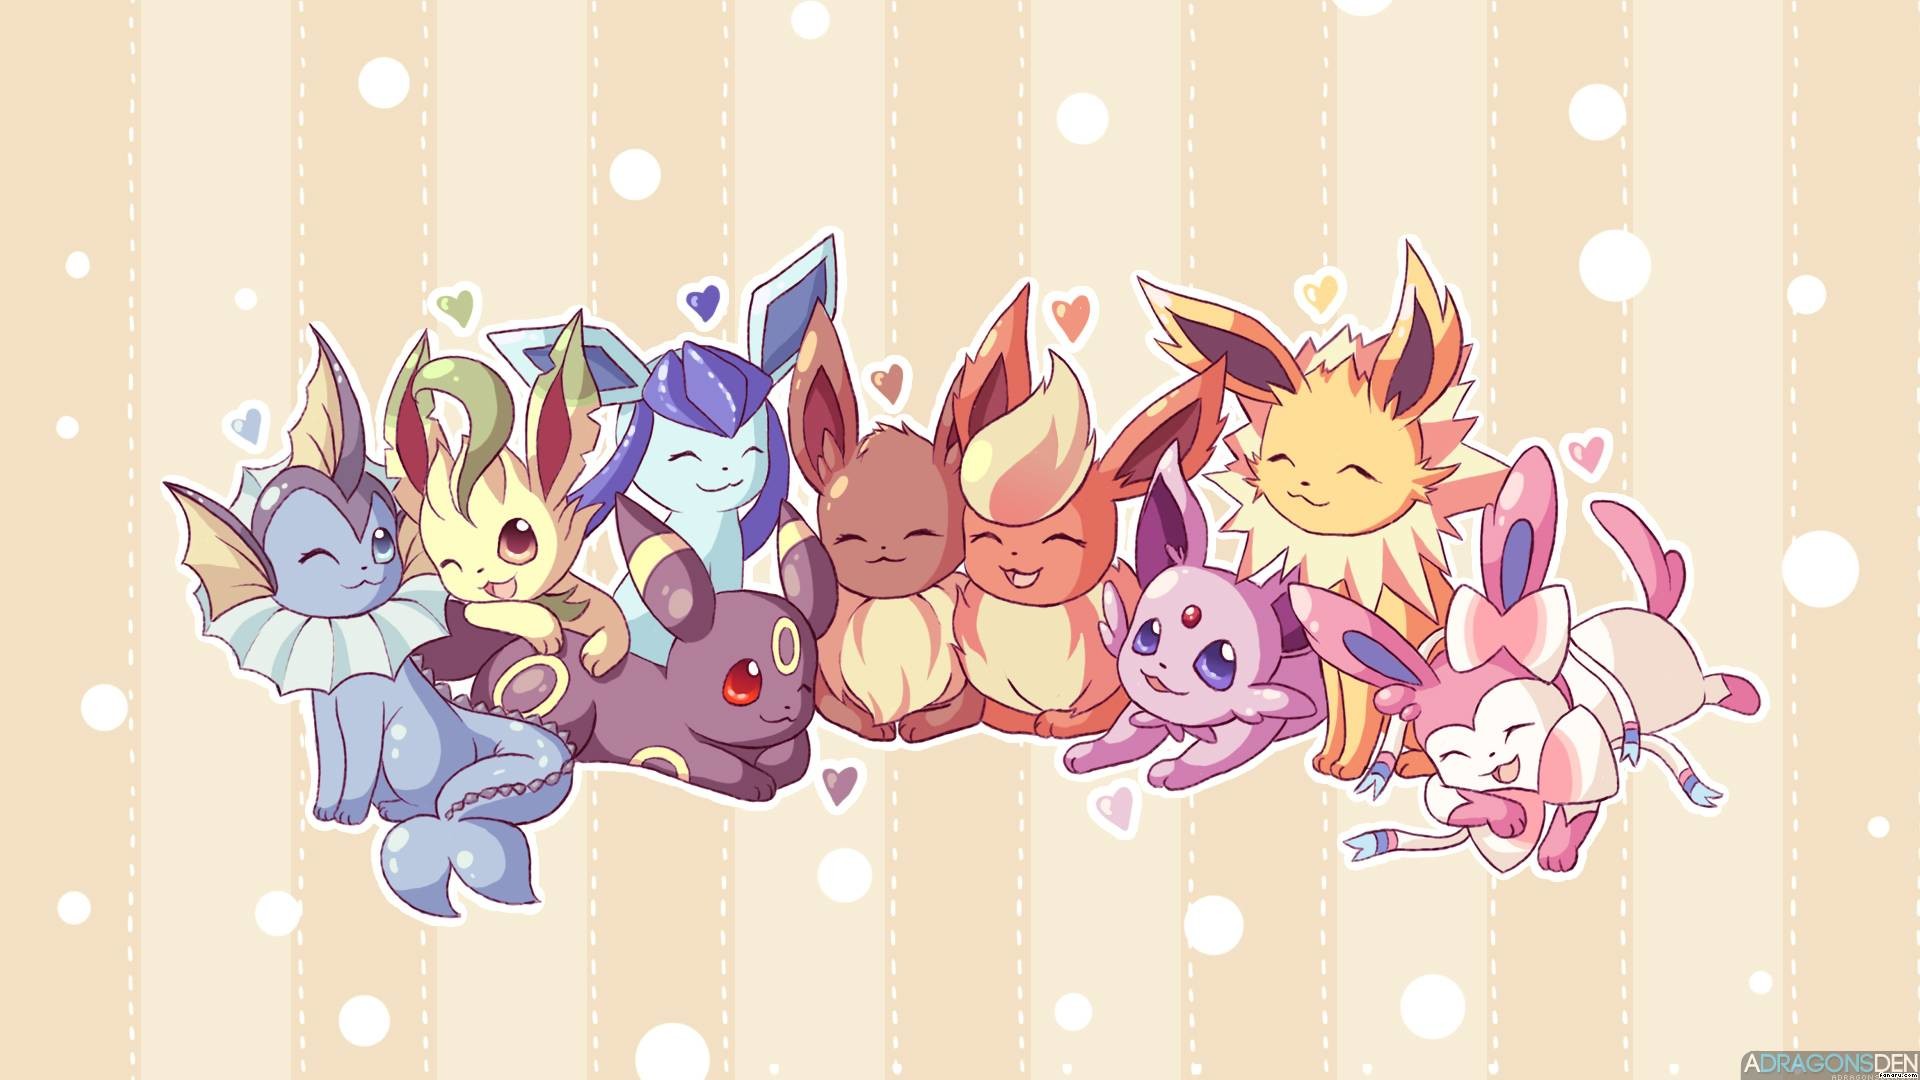 Quality HD Pokemon Images, Wallpapers for Desktop 19201080 Pokemon Pictures Wallpapers 39 Wallpapers Adorable Wallpapers Wallpapers Pinterest